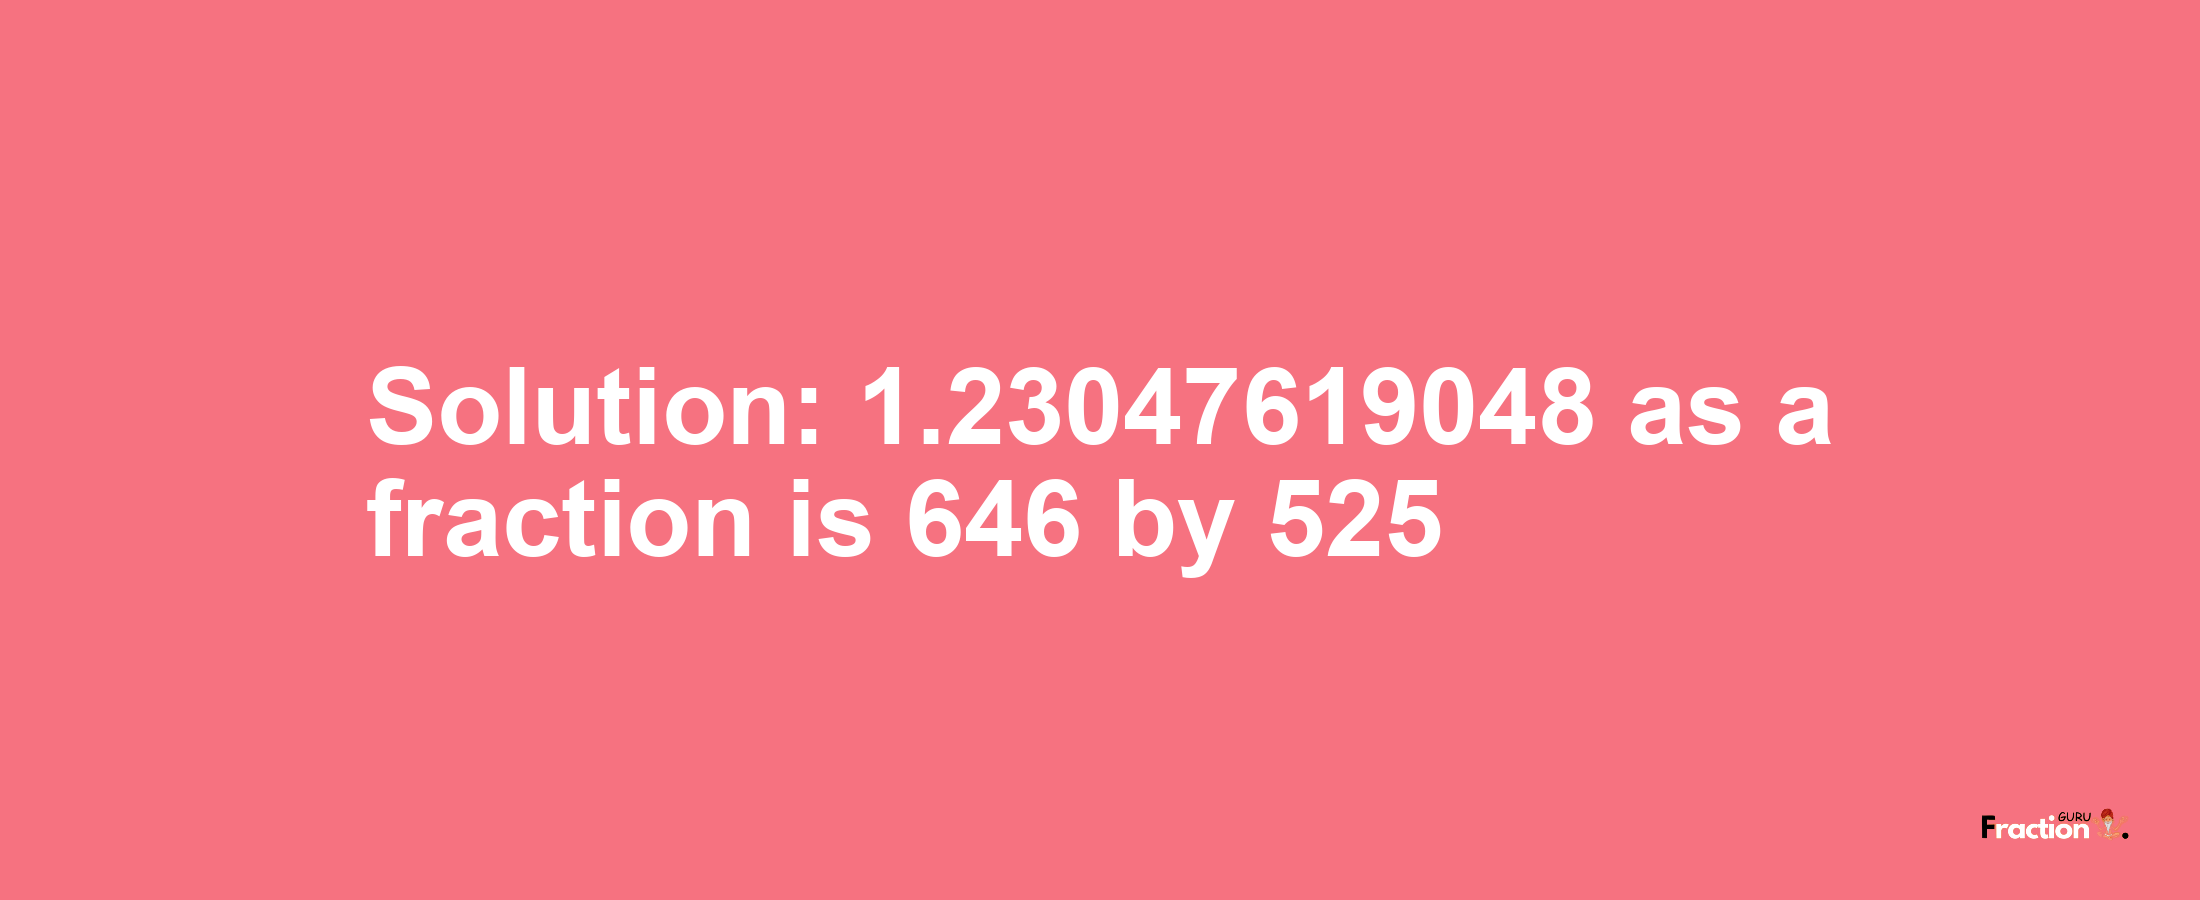 Solution:1.23047619048 as a fraction is 646/525